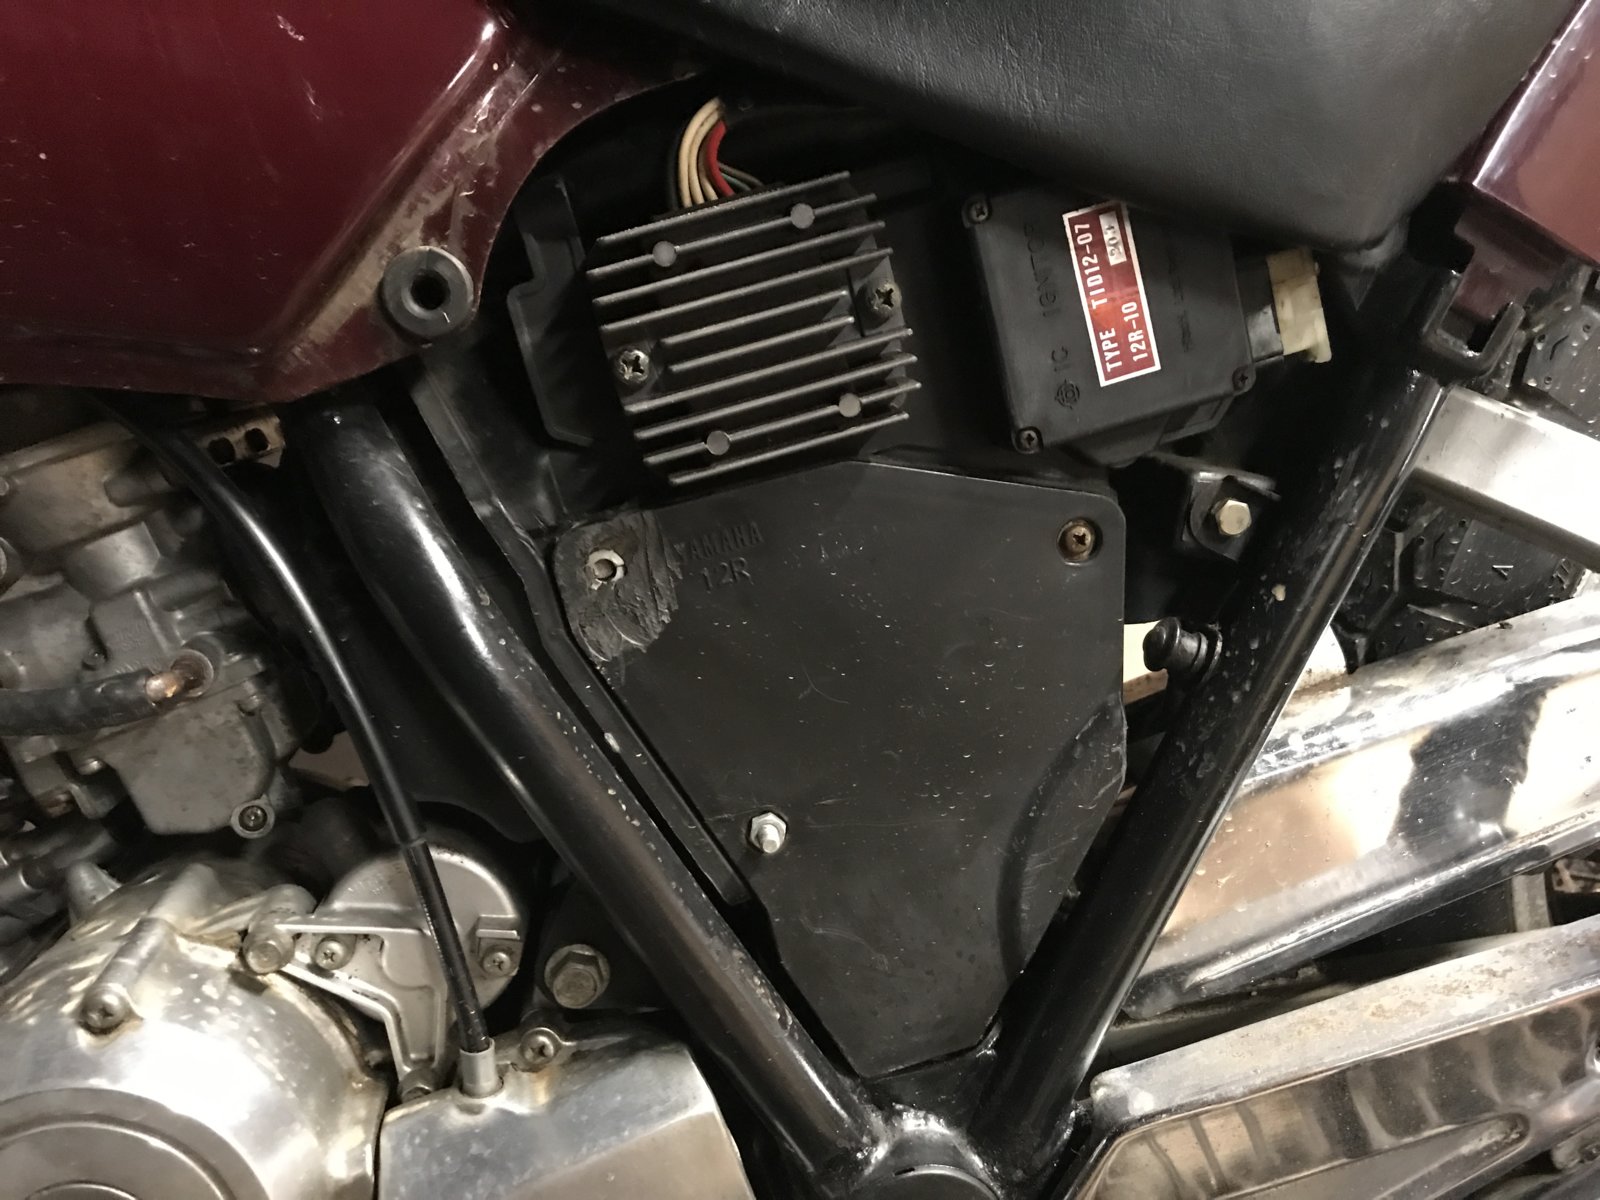 Airbox Cover Trashed